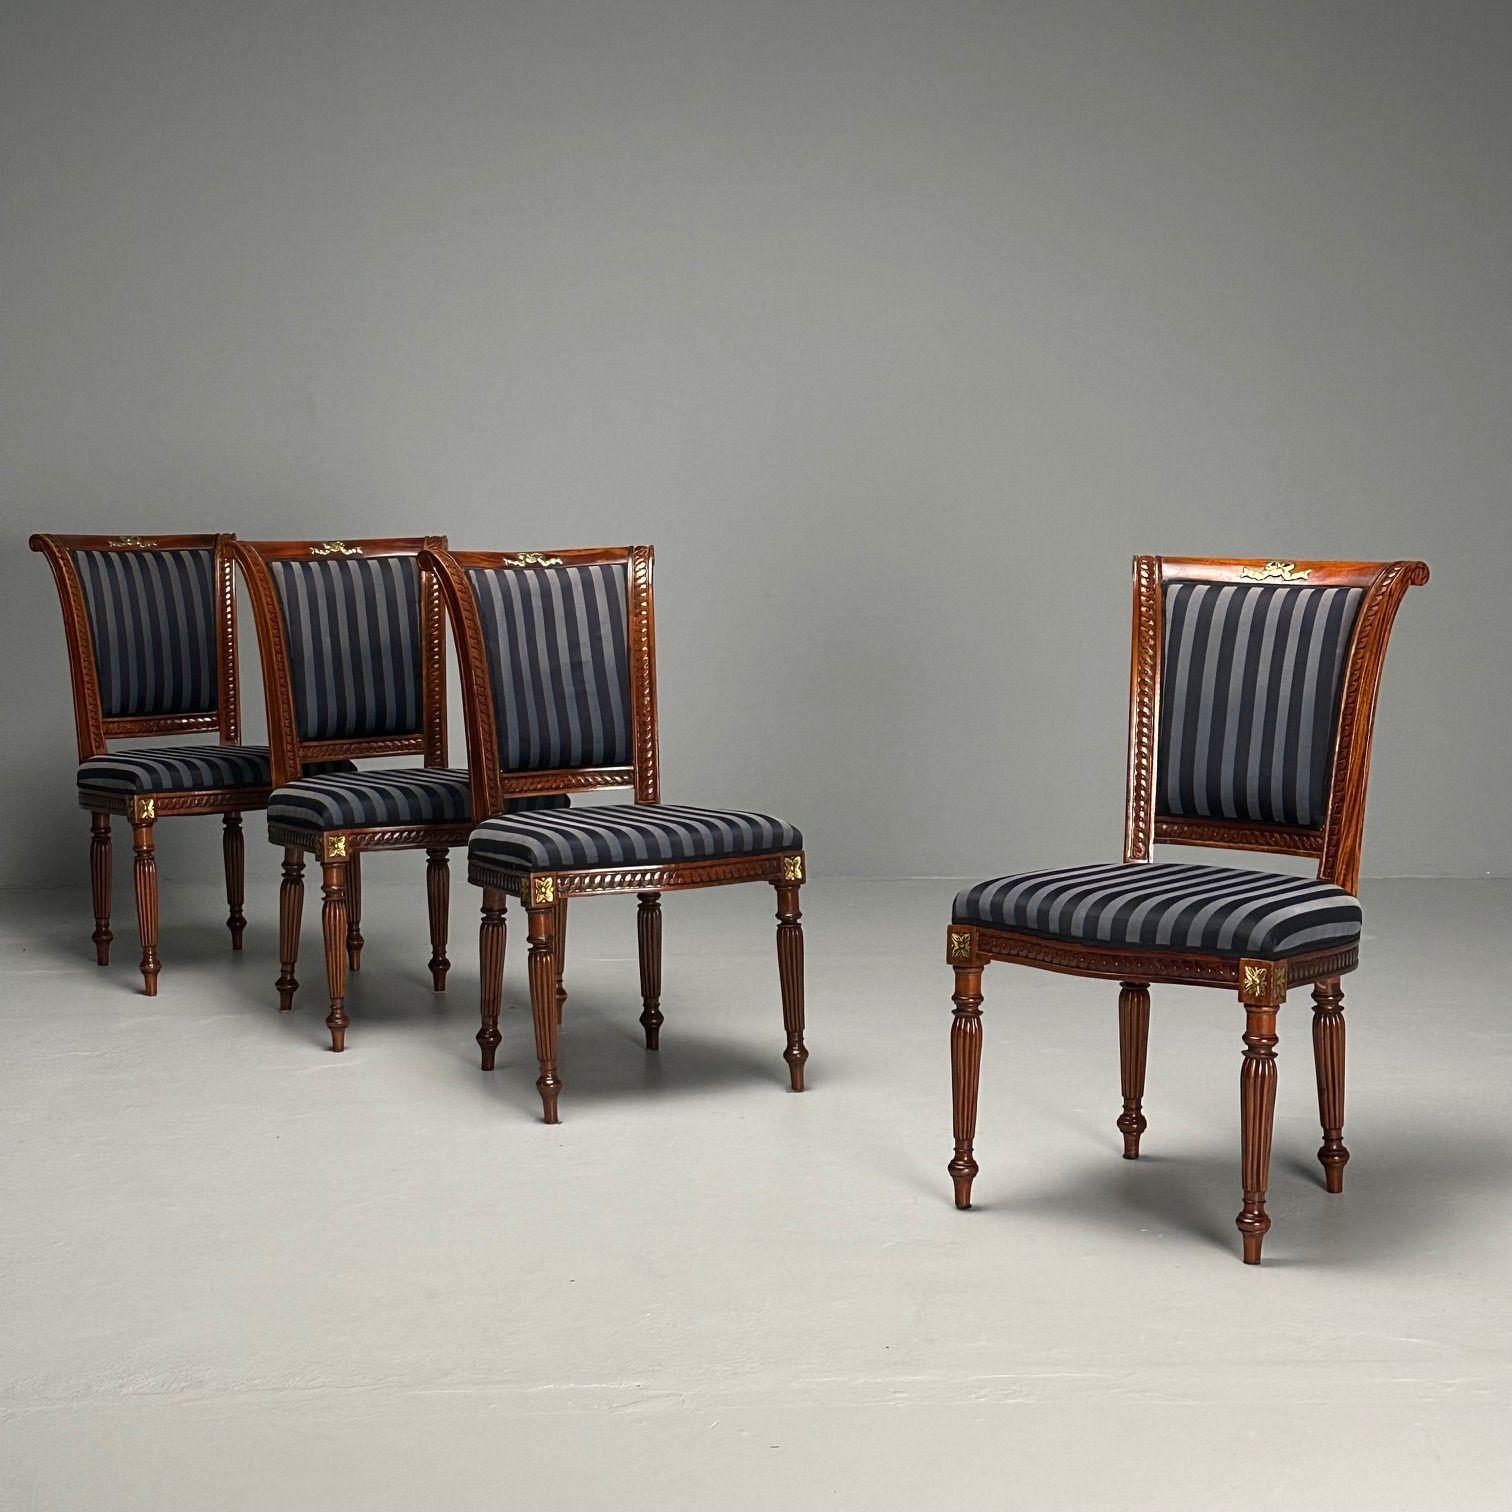 Louis XVI, Dining or Side Chairs, Walnut, Navy Fabric, Giltwood, United States, 2000s

Set of four dining chairs in the Louis XVI style with walnut frames, navy blue striped fabric, and giltwood floral accents. The chairs sit on reeded and tapered